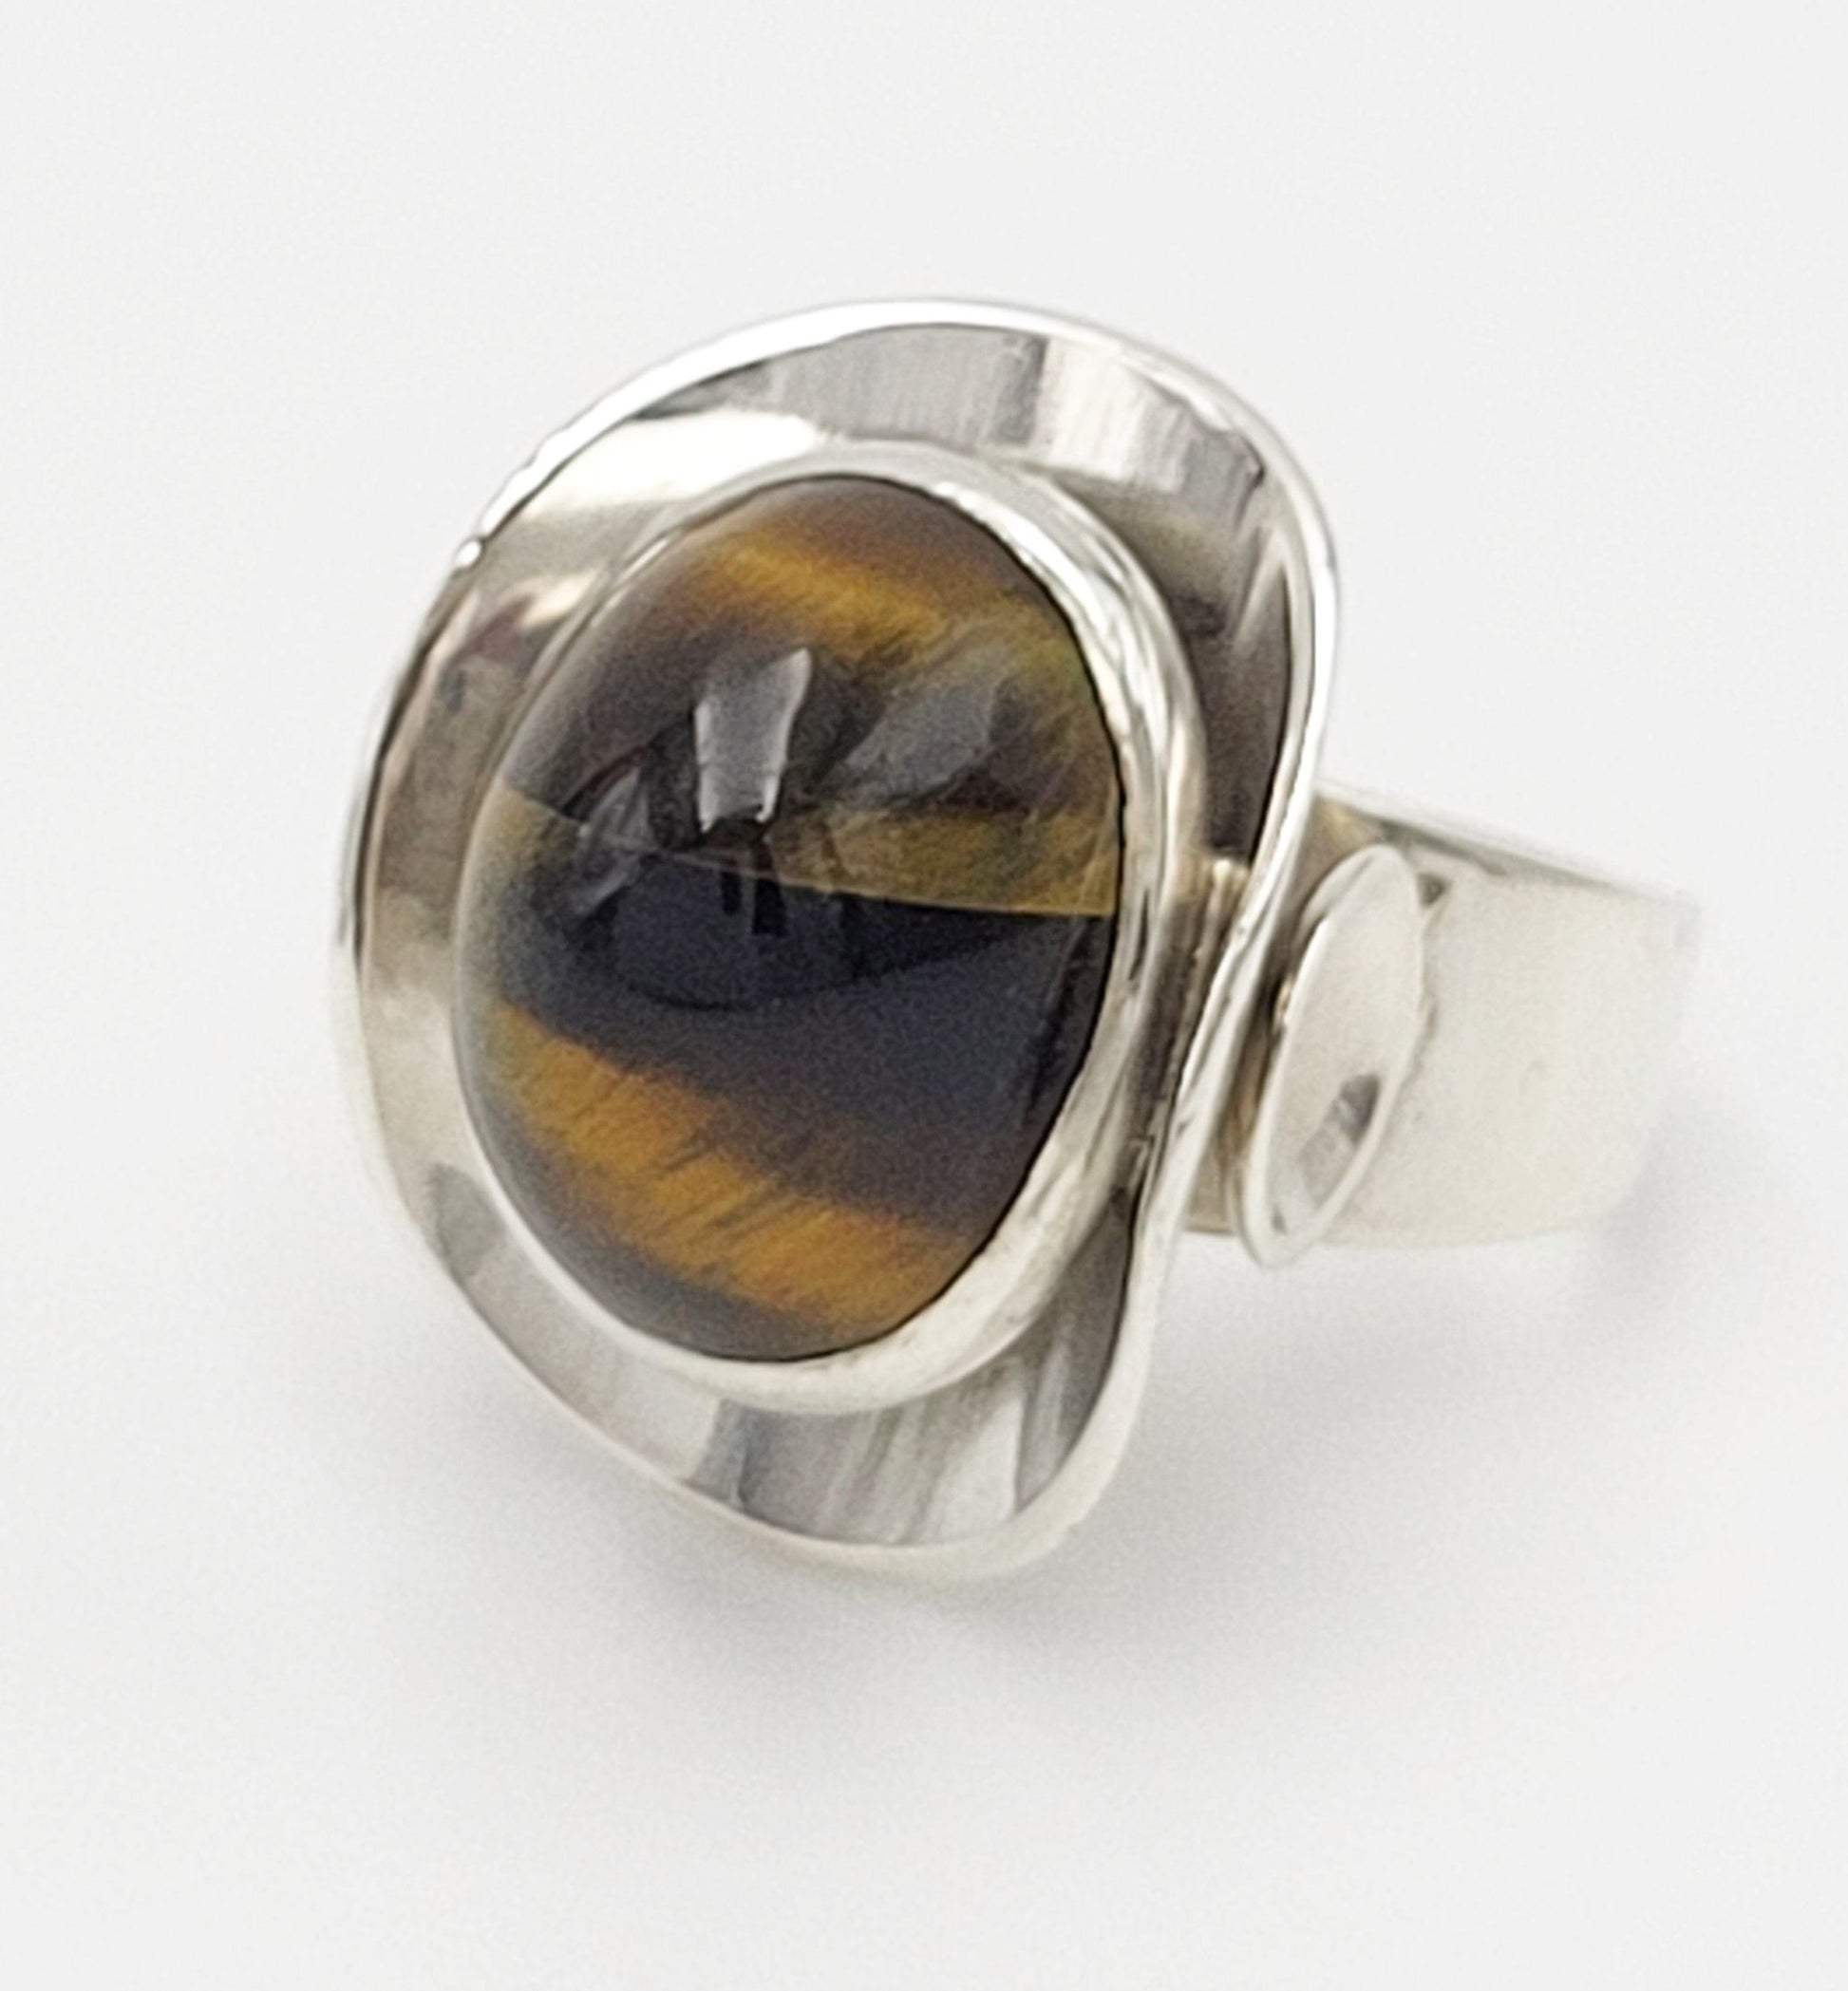 TMCMH Jewelry Sterling Silver & Tiger's Eye Modernist Ring